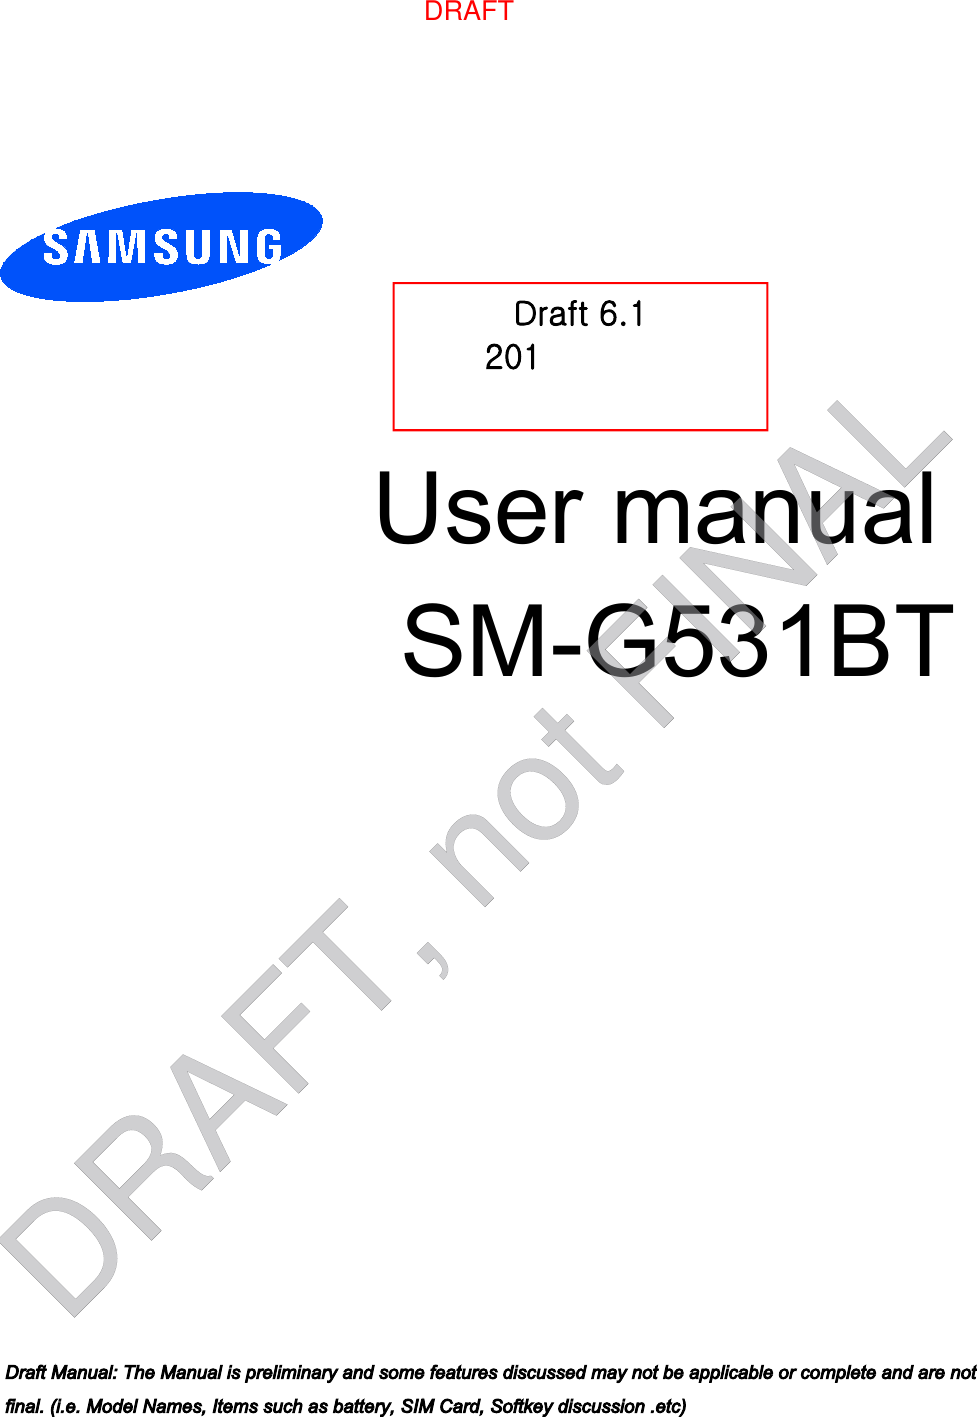 User manual  SM-G531BTDraft 6.1 201[-XX-X` Only for Approval Draft Manual: The Manual is preliminary and some features discussed may not be applicable or complete and are not final. (i.e. Model Names, Items such as battery, SIM Card, Softkey discussion .etc)DRAFT, not FINALDRAFT